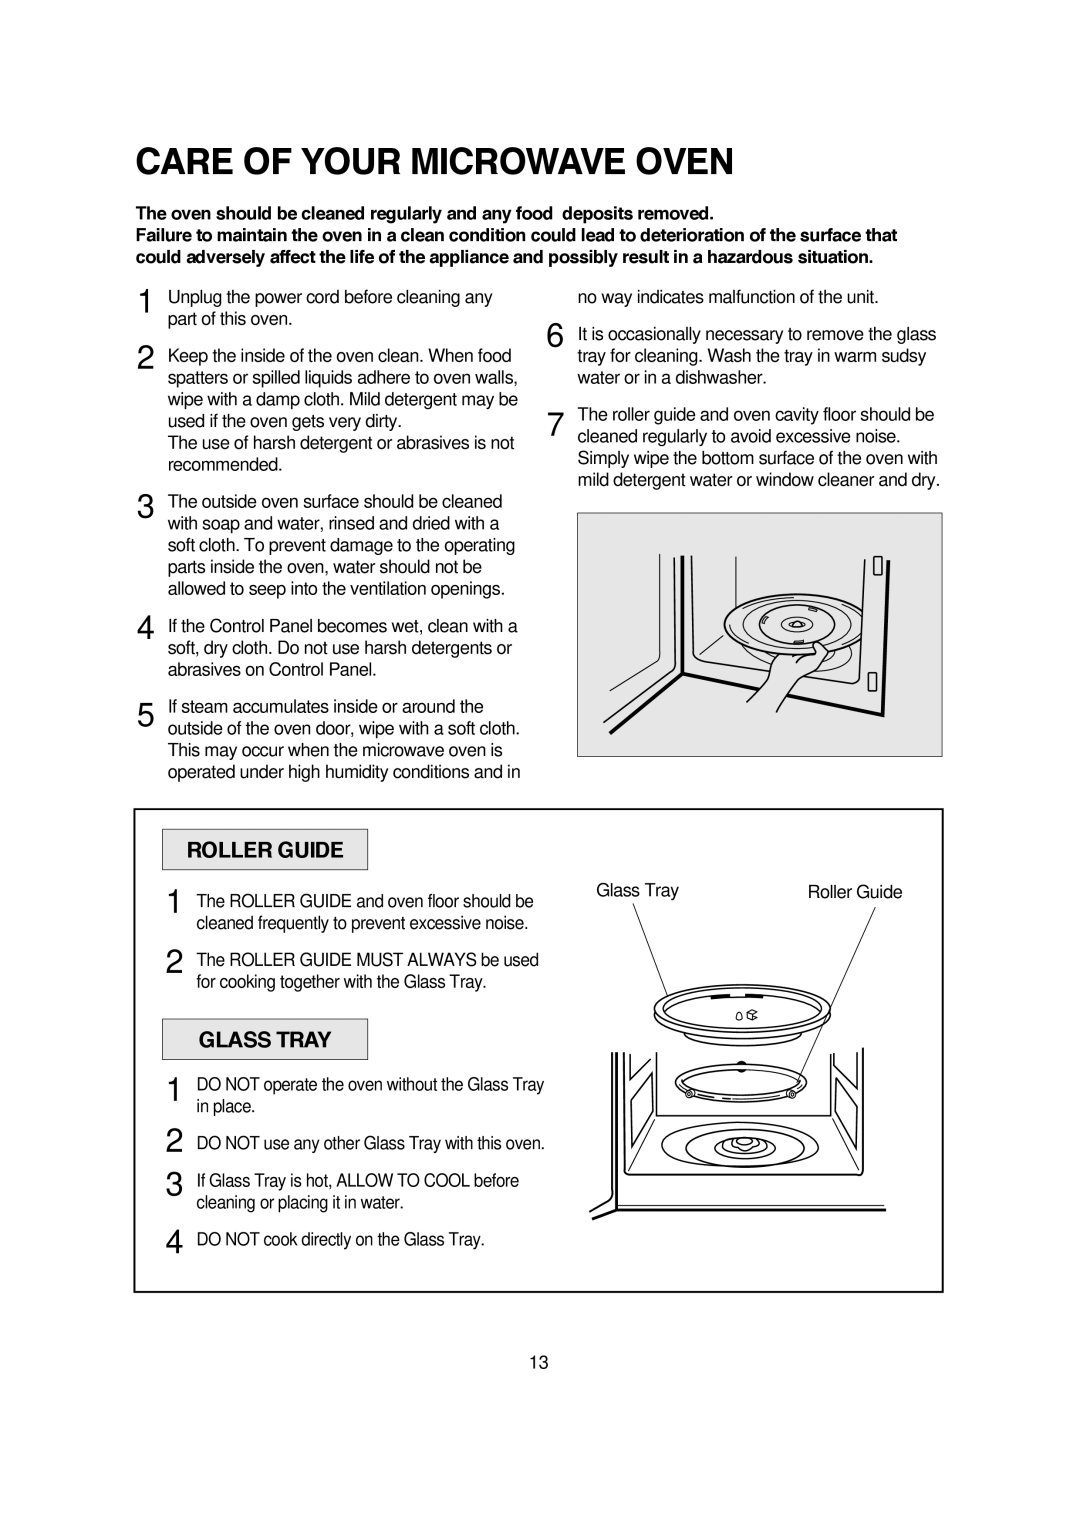 Magic Chef MCM1110ST instruction manual Care Of Your Microwave Oven, Roller Guide, Glass Tray 